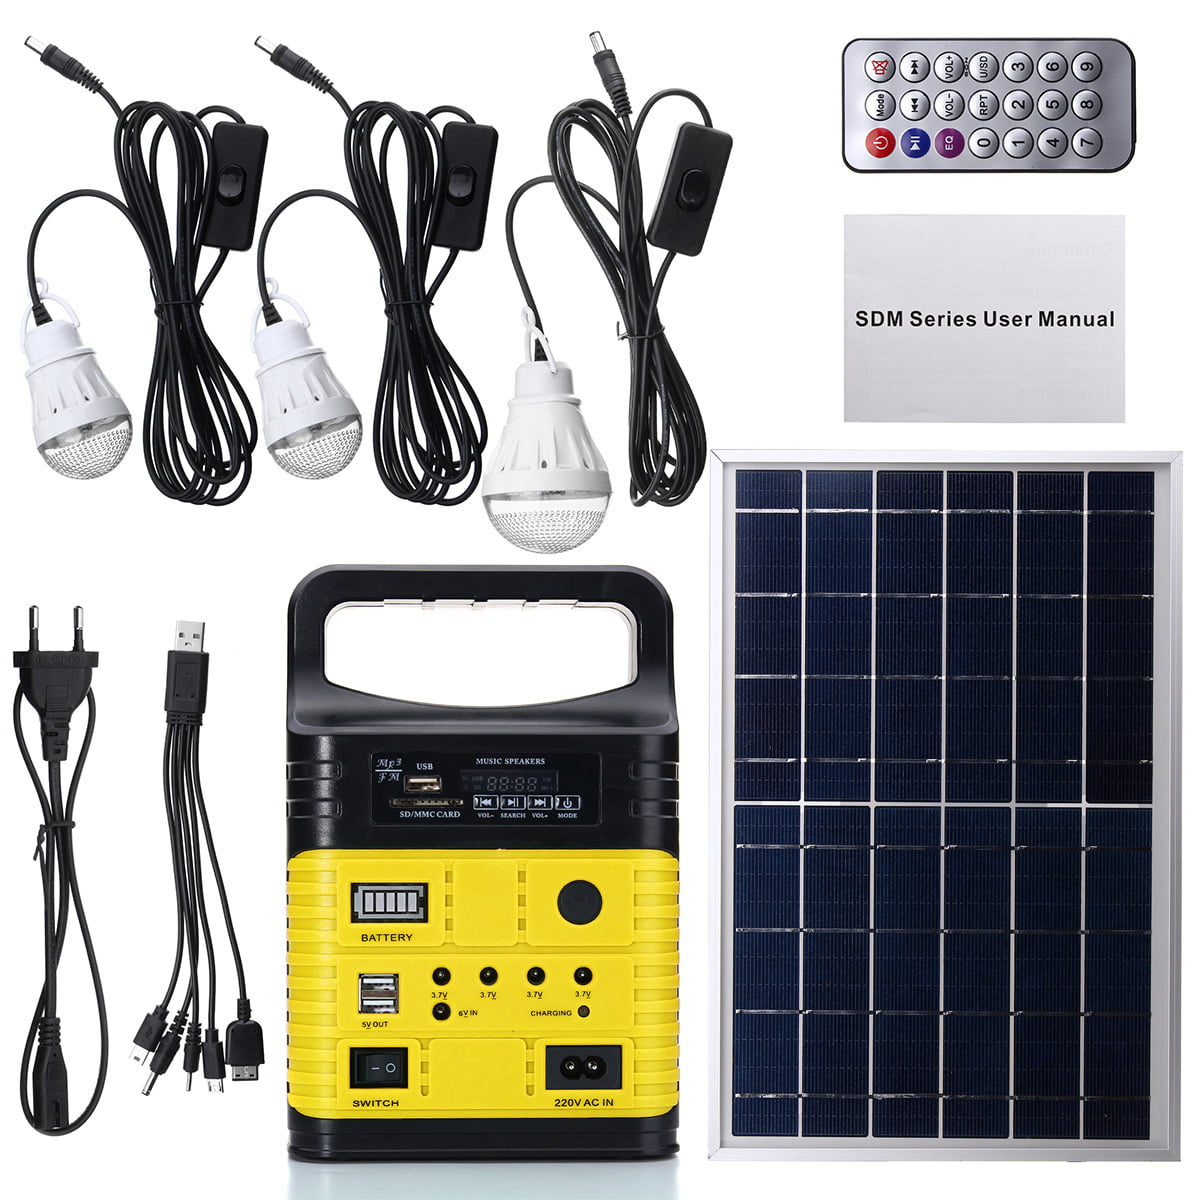 Hurricane Fishing Solar Generator green Battery Power Supply with Led Flashlight for Home Emergency Hunting Portable Power Station with Solar Panel&USB DC Outlets Outdoor Camping 